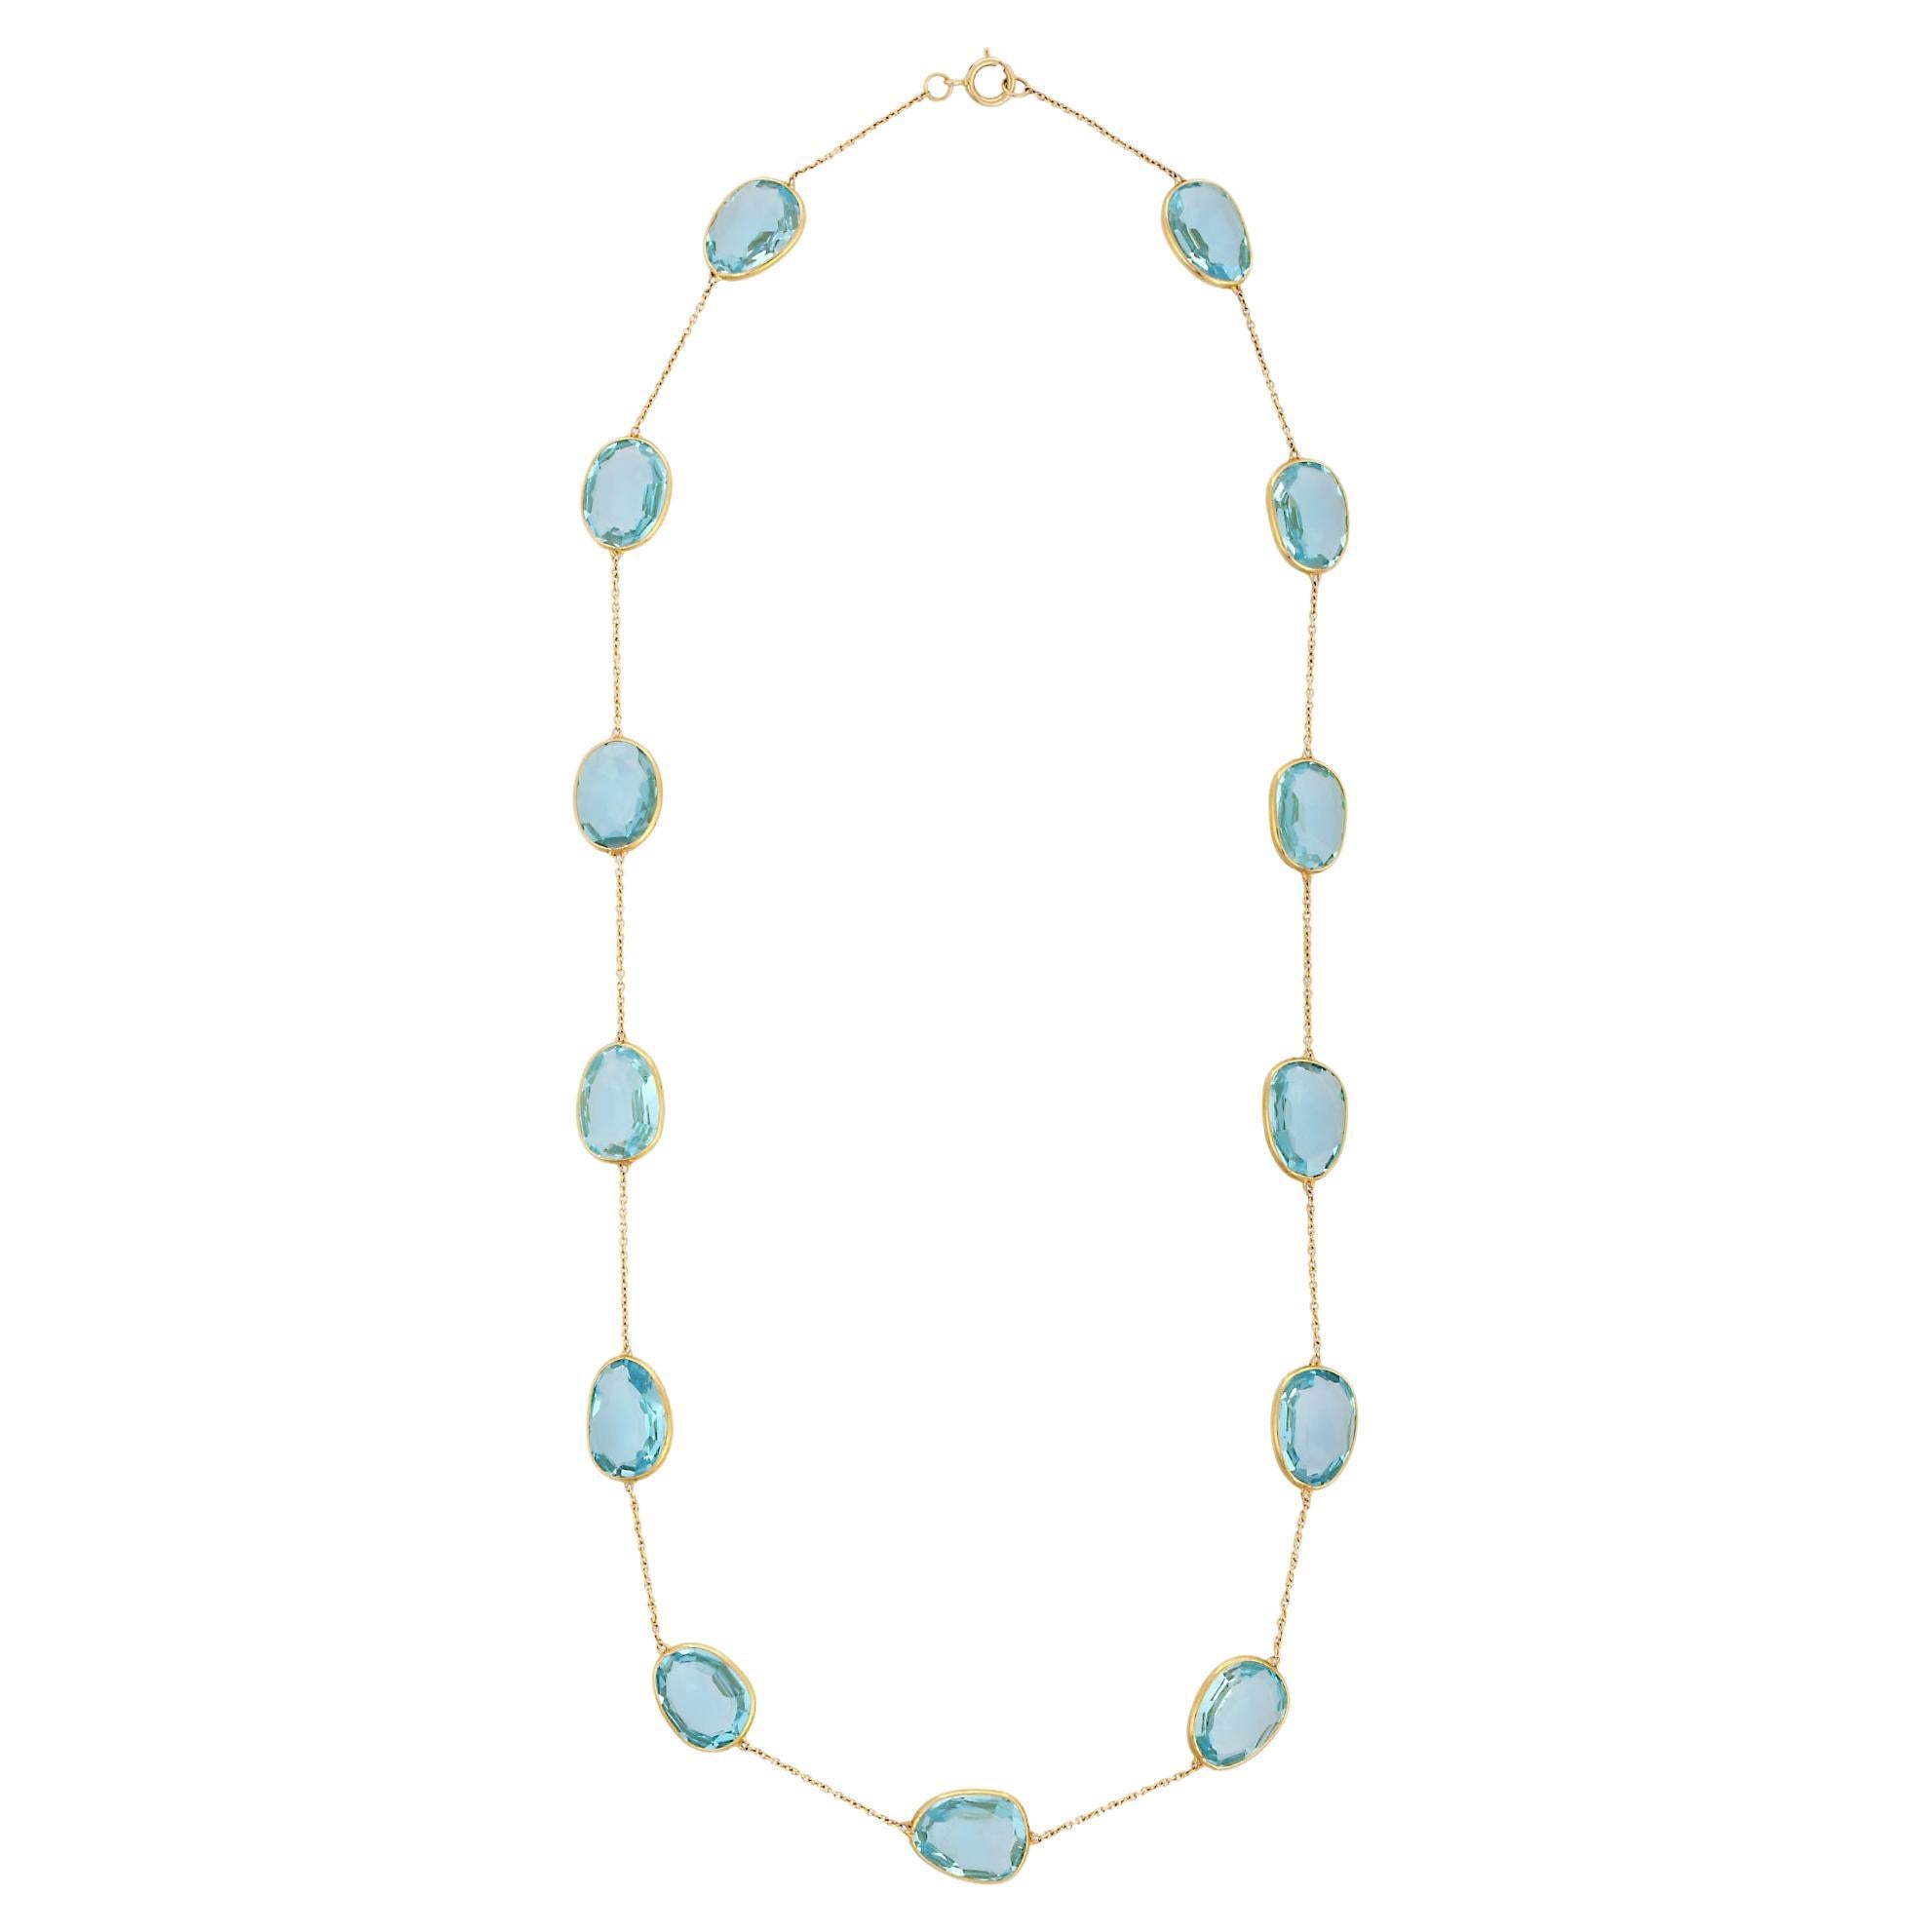 Delicate 47.55 Ct Blue Topaz Chain Necklace, 18K Yellow Gold Necklace For Sale